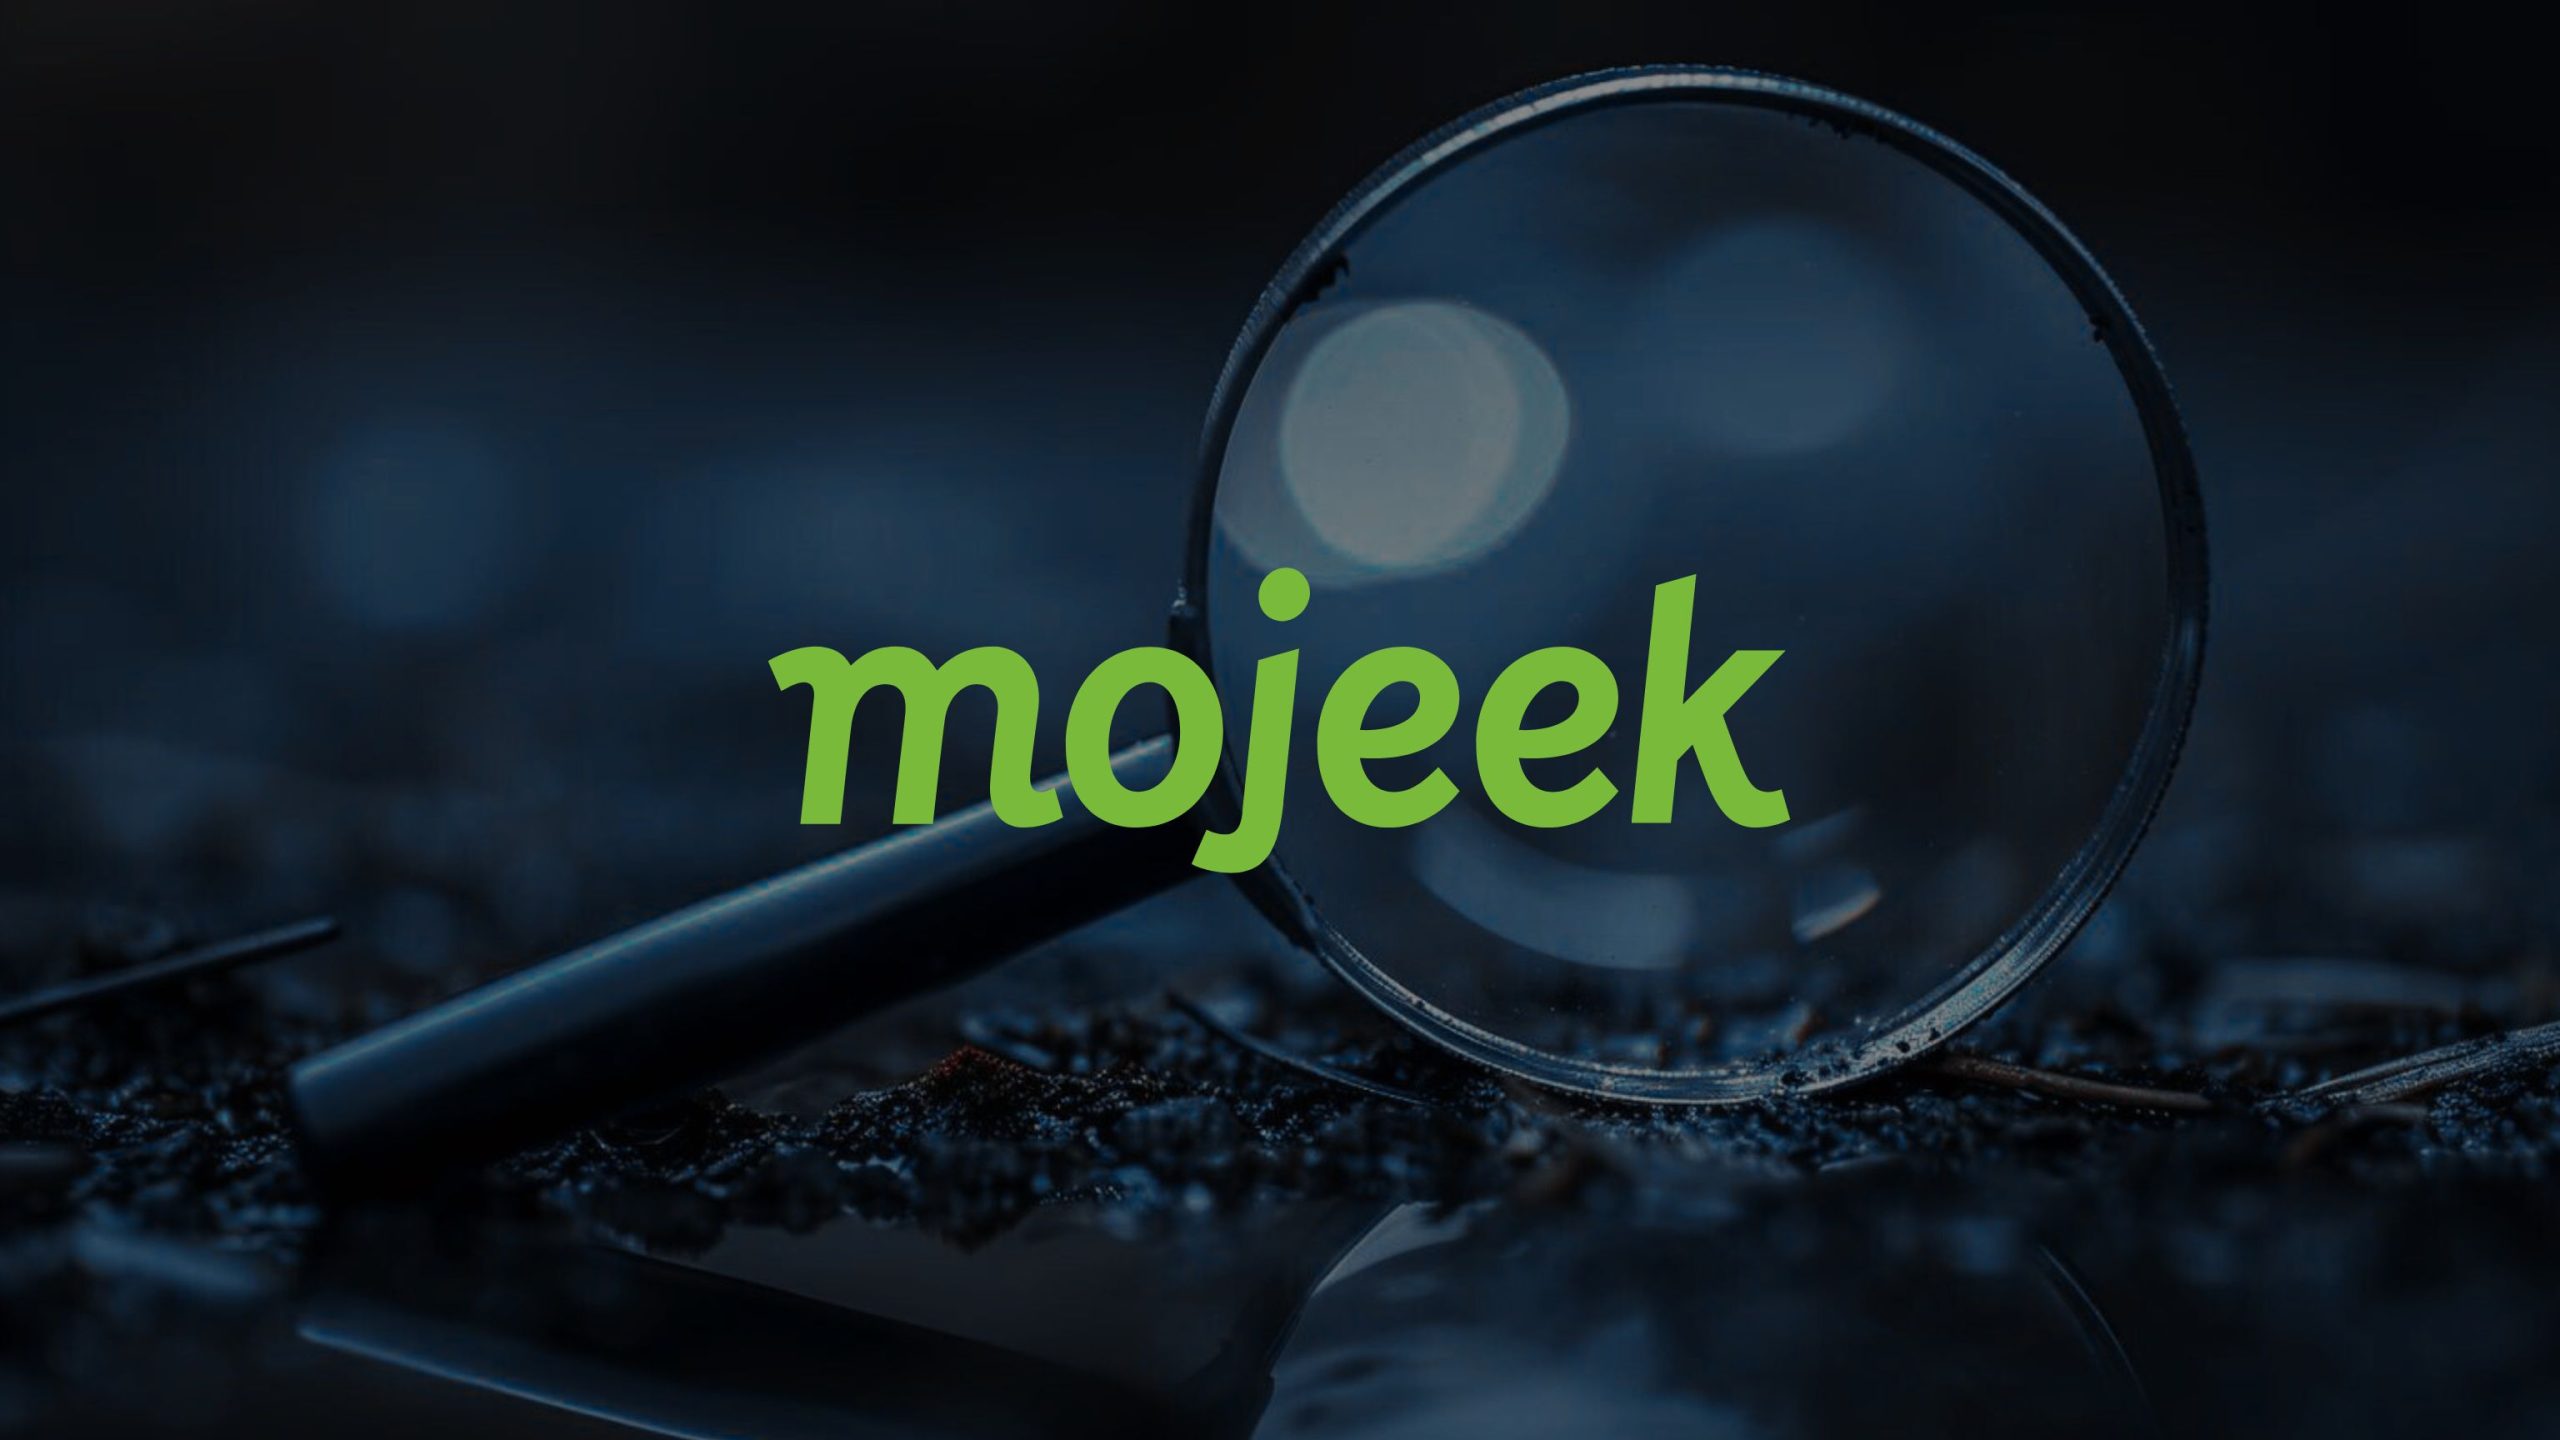 Private Search Engine Mojeek Deploys New Algorithm That Provides Better Results for Users